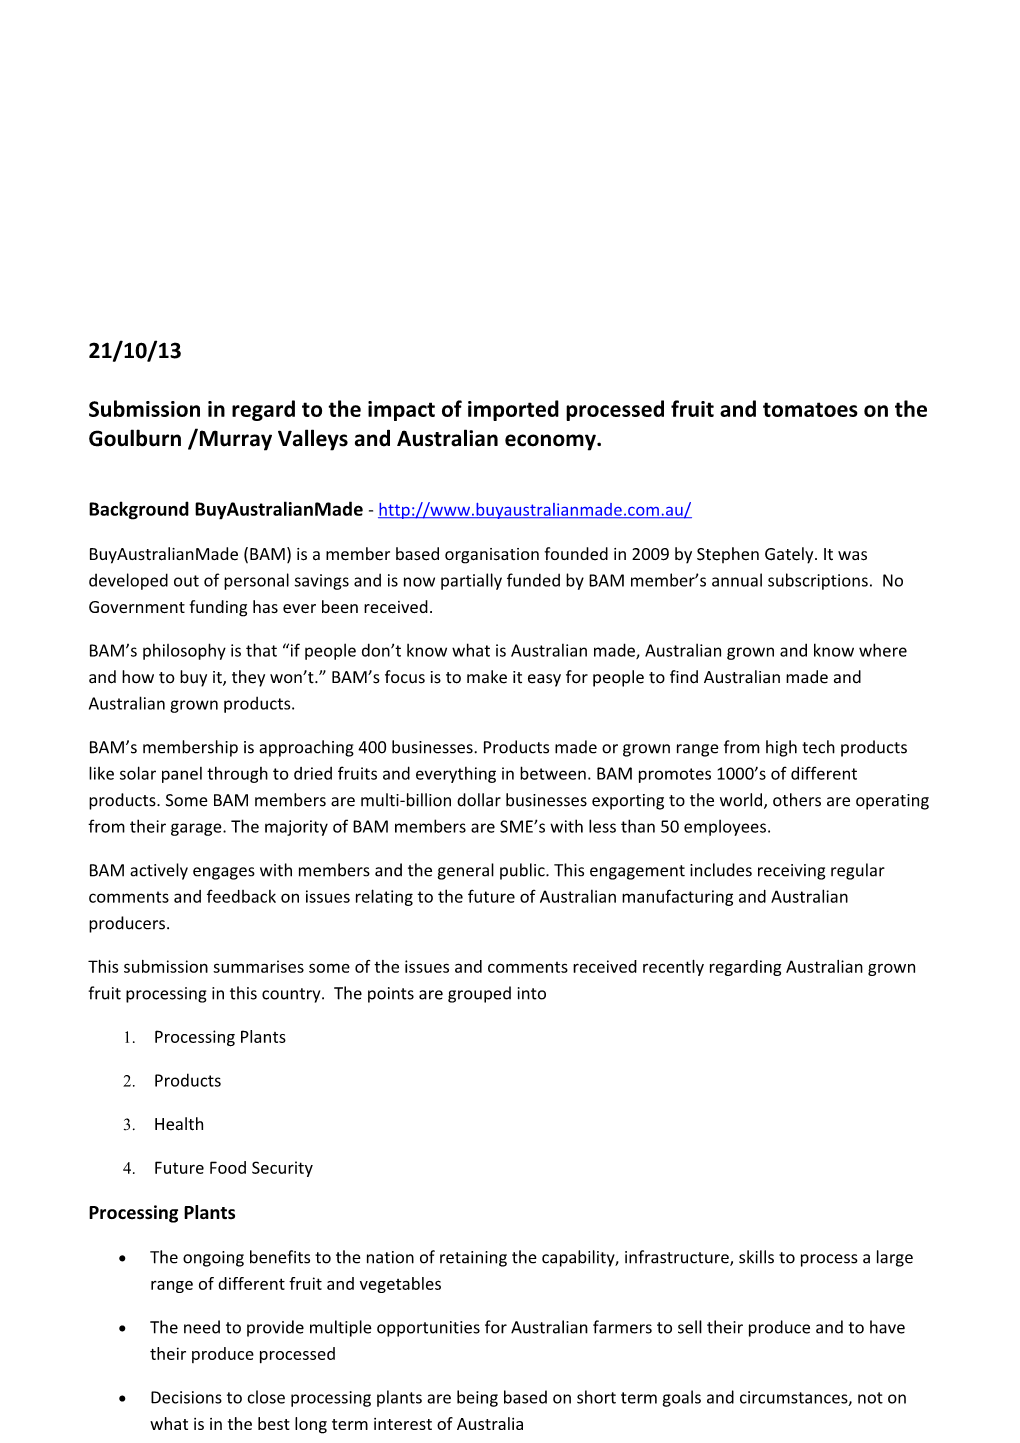 Submission AR64 - Buyaustralianmade - Imports of Processed Fruit Products - Public Inquiry